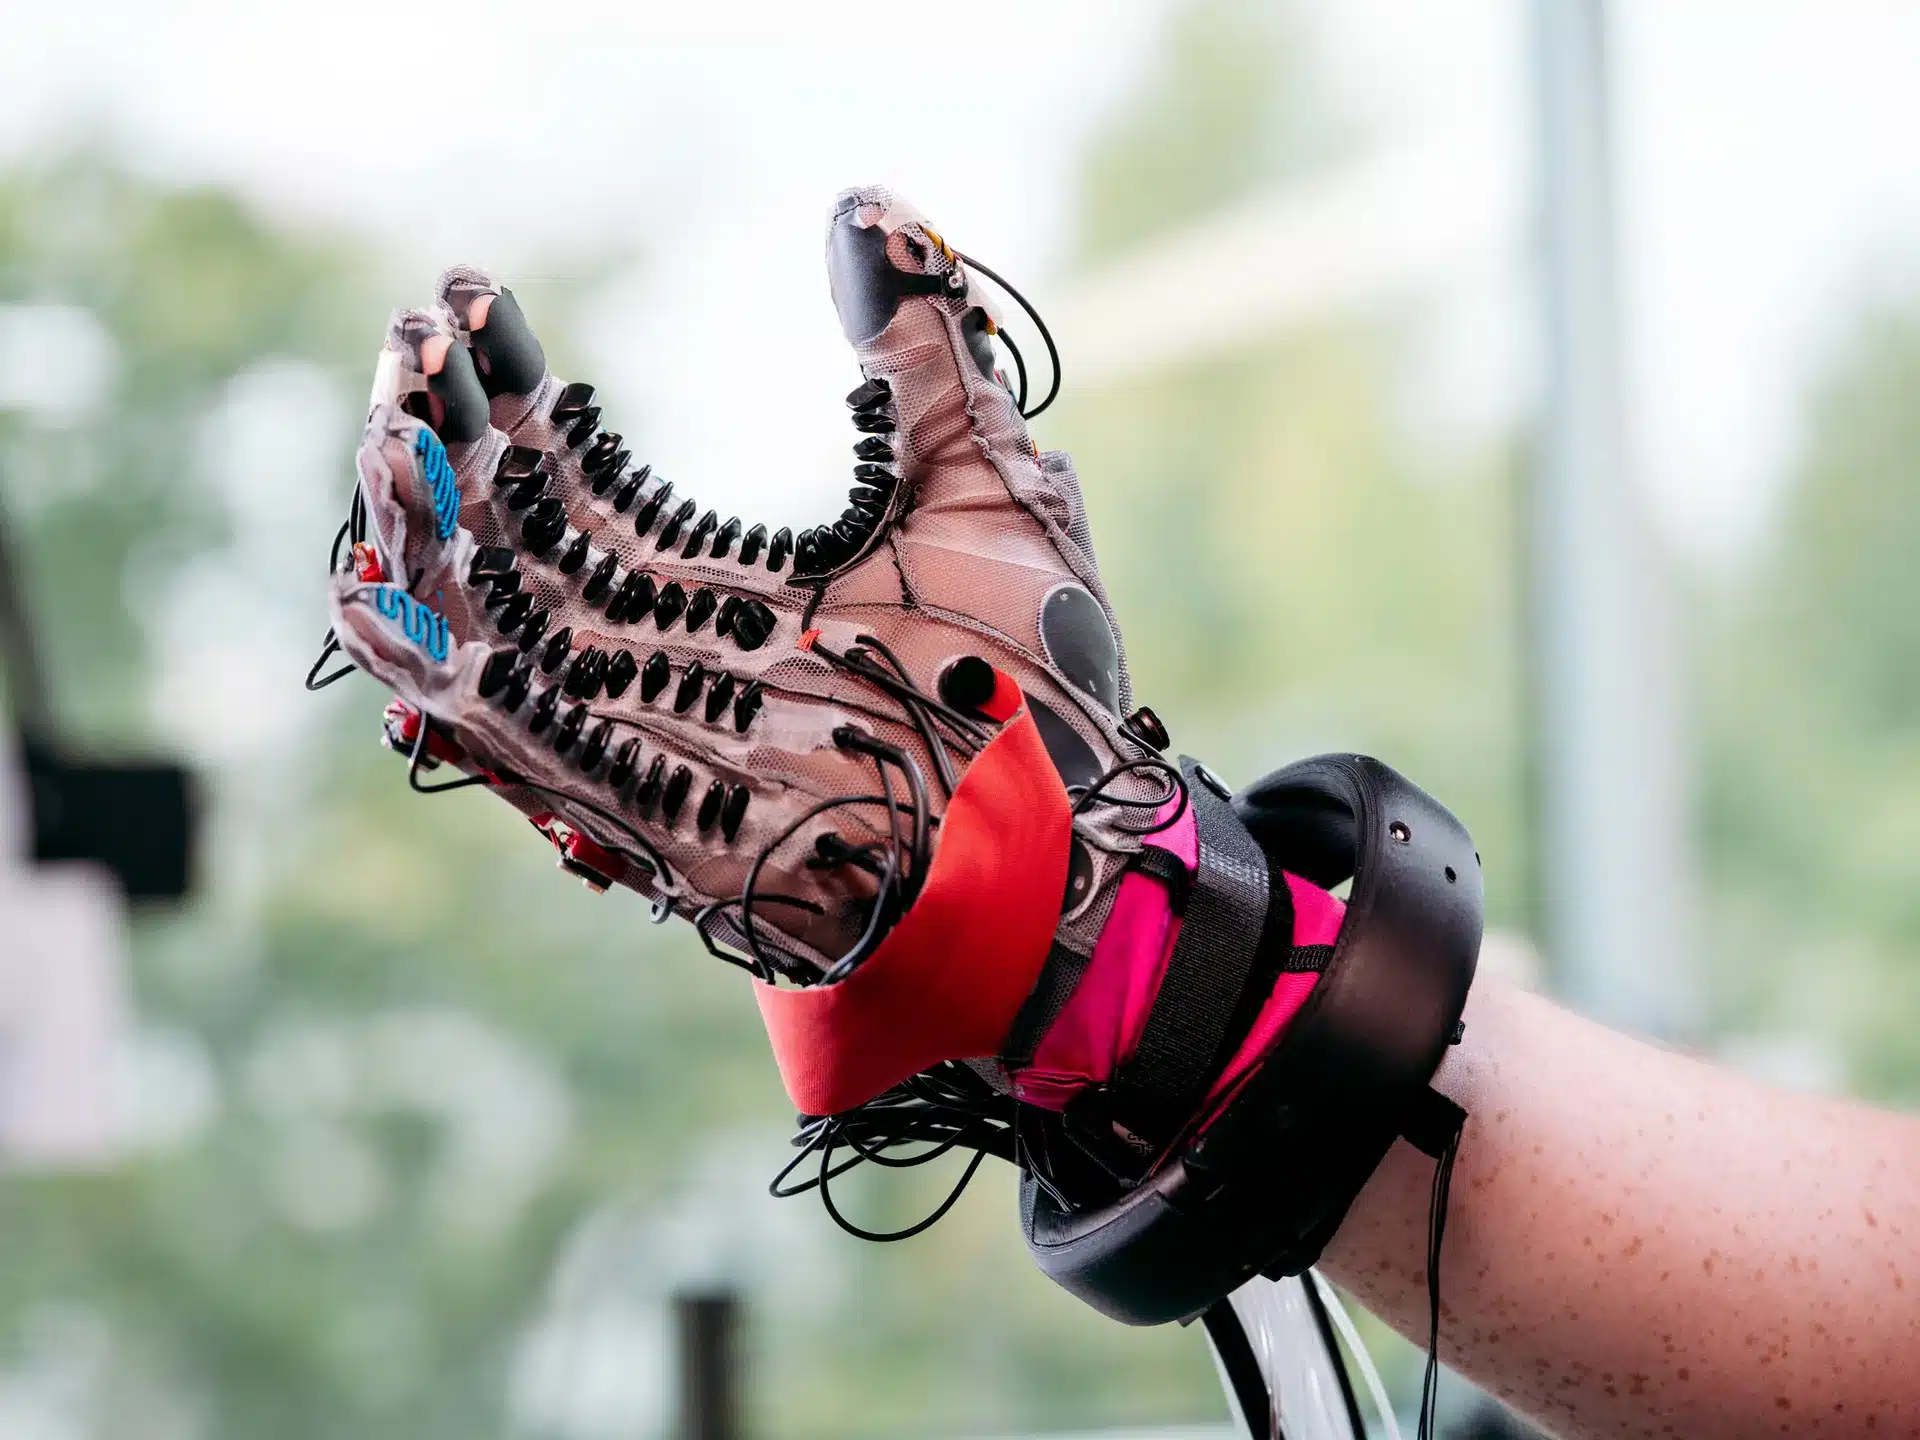 New Haptic Glove With Tiny Valve Pixels to Simulate Pressure: Revolutionary Technology with Endless Possibilities!